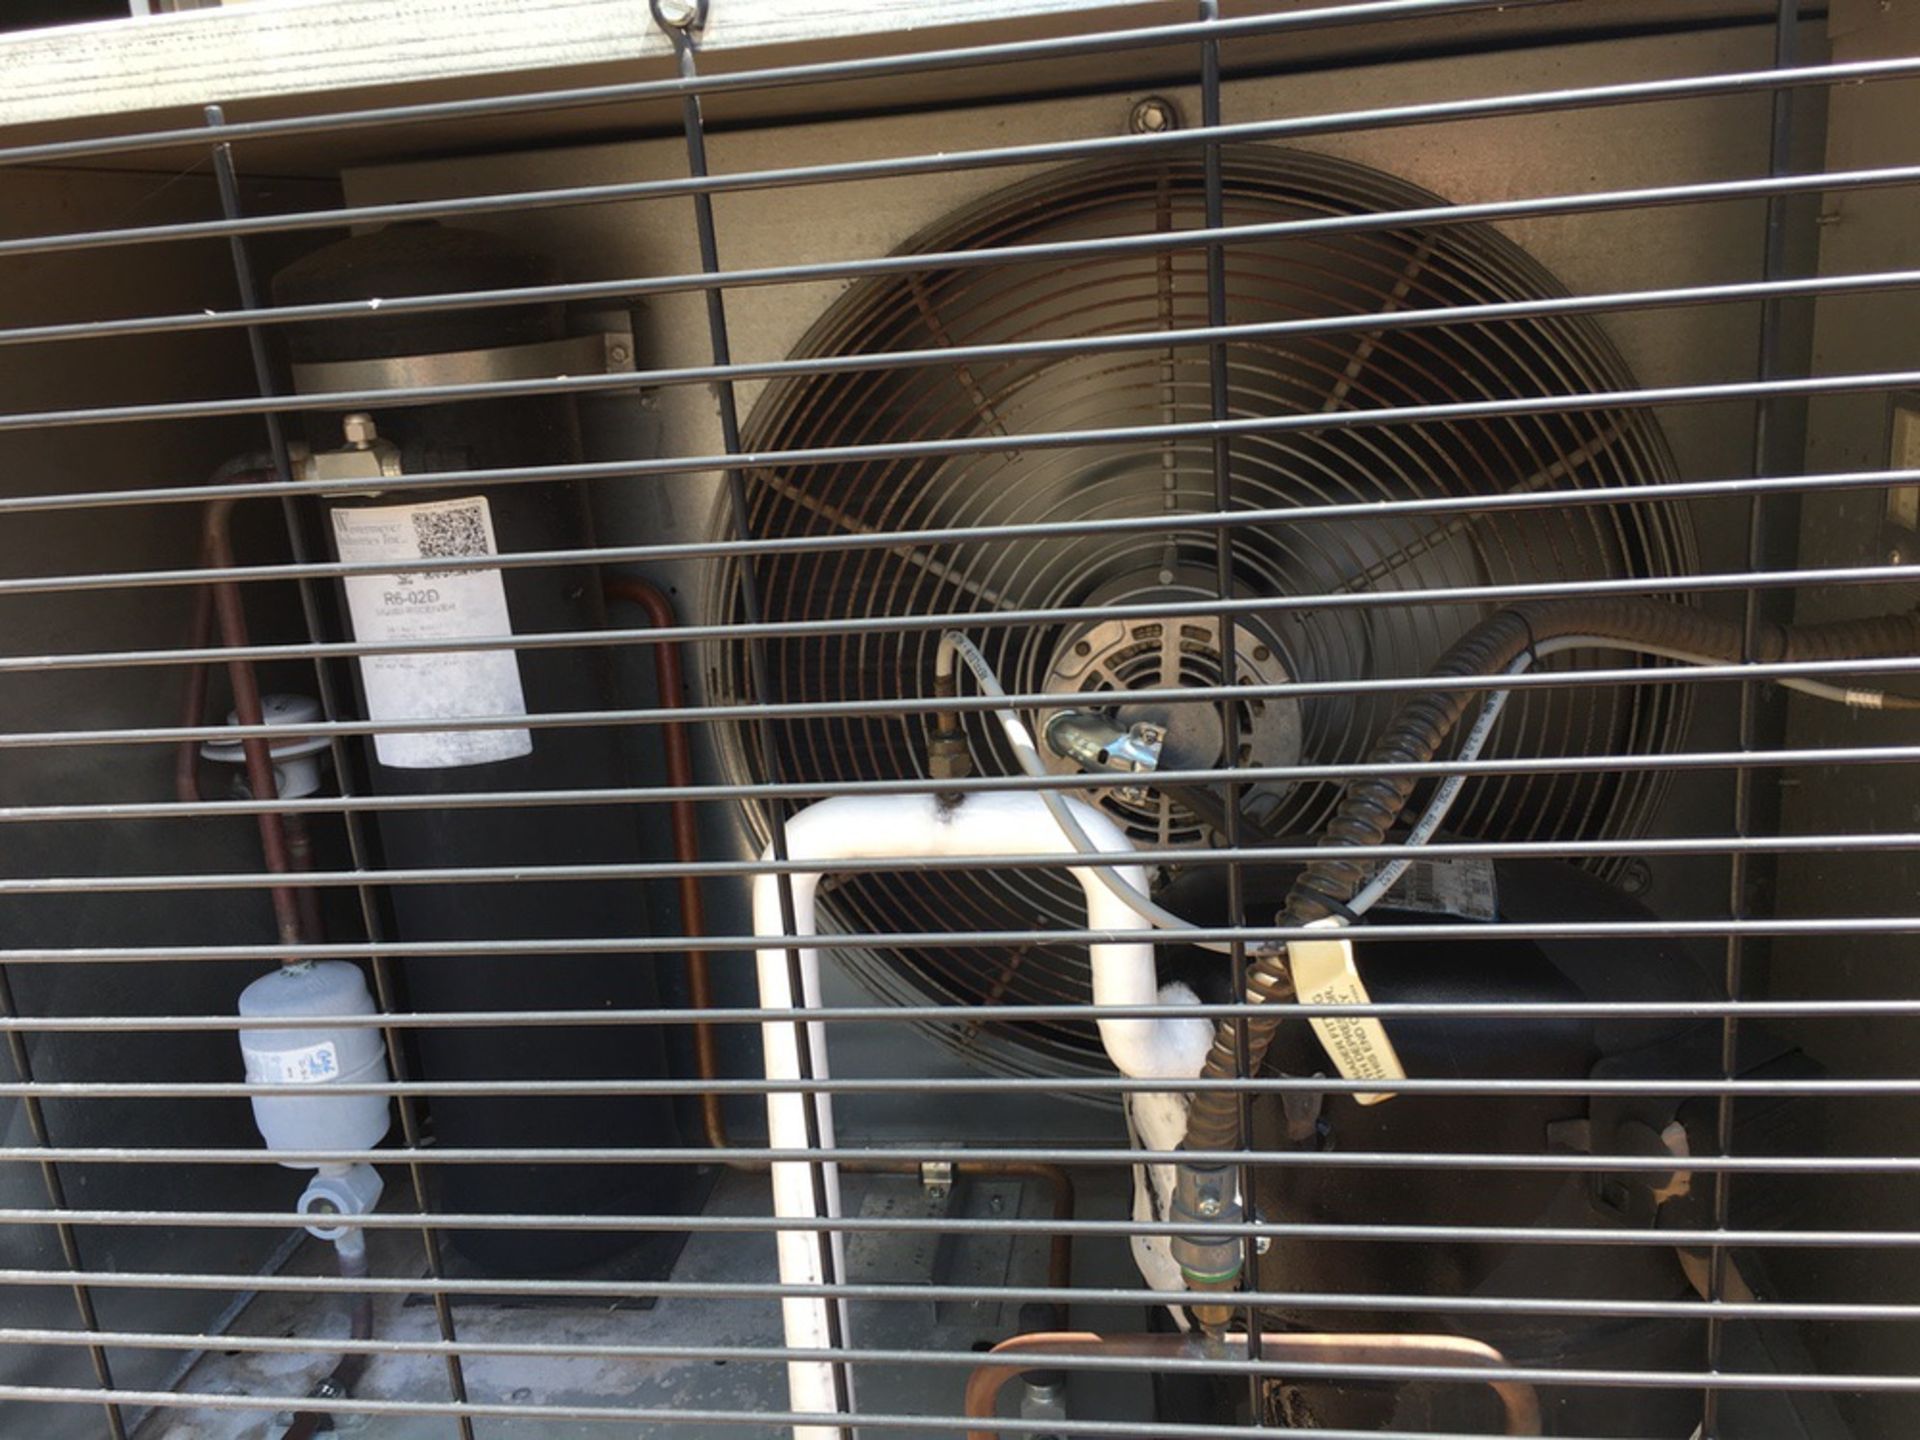 Keep Rite Condensing Unit for Walk-In Cooler, Air Cooled, Model KEHA030E6-HT3B-B, | Rig Fee: $300 - Image 4 of 6